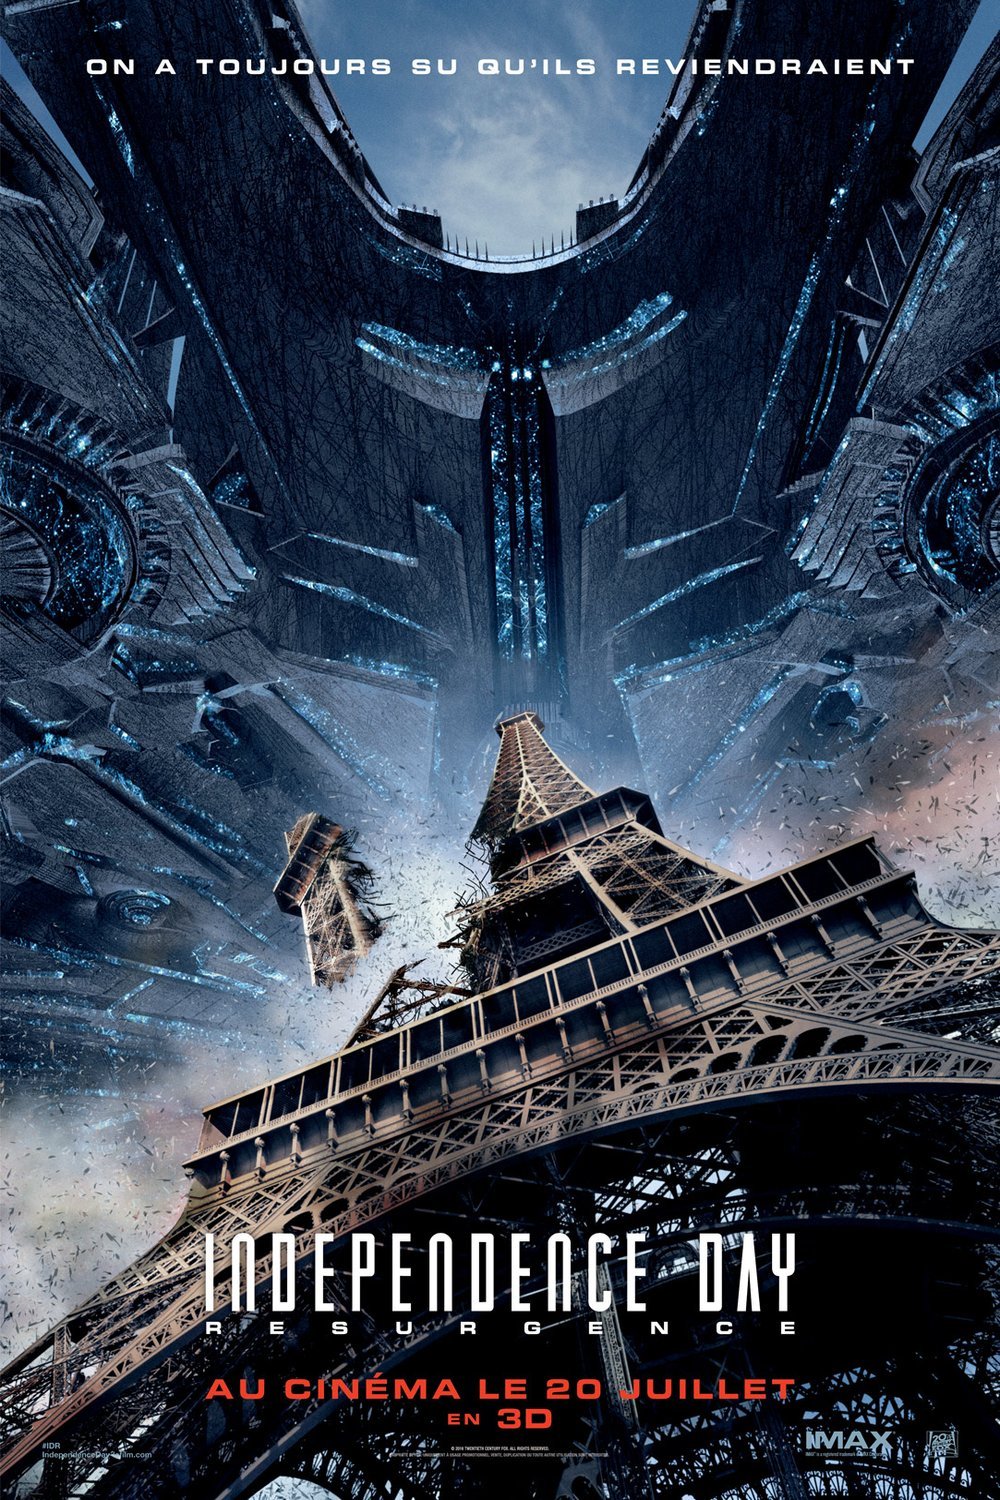 Poster of the movie Independence Day: Résurgence v.f.